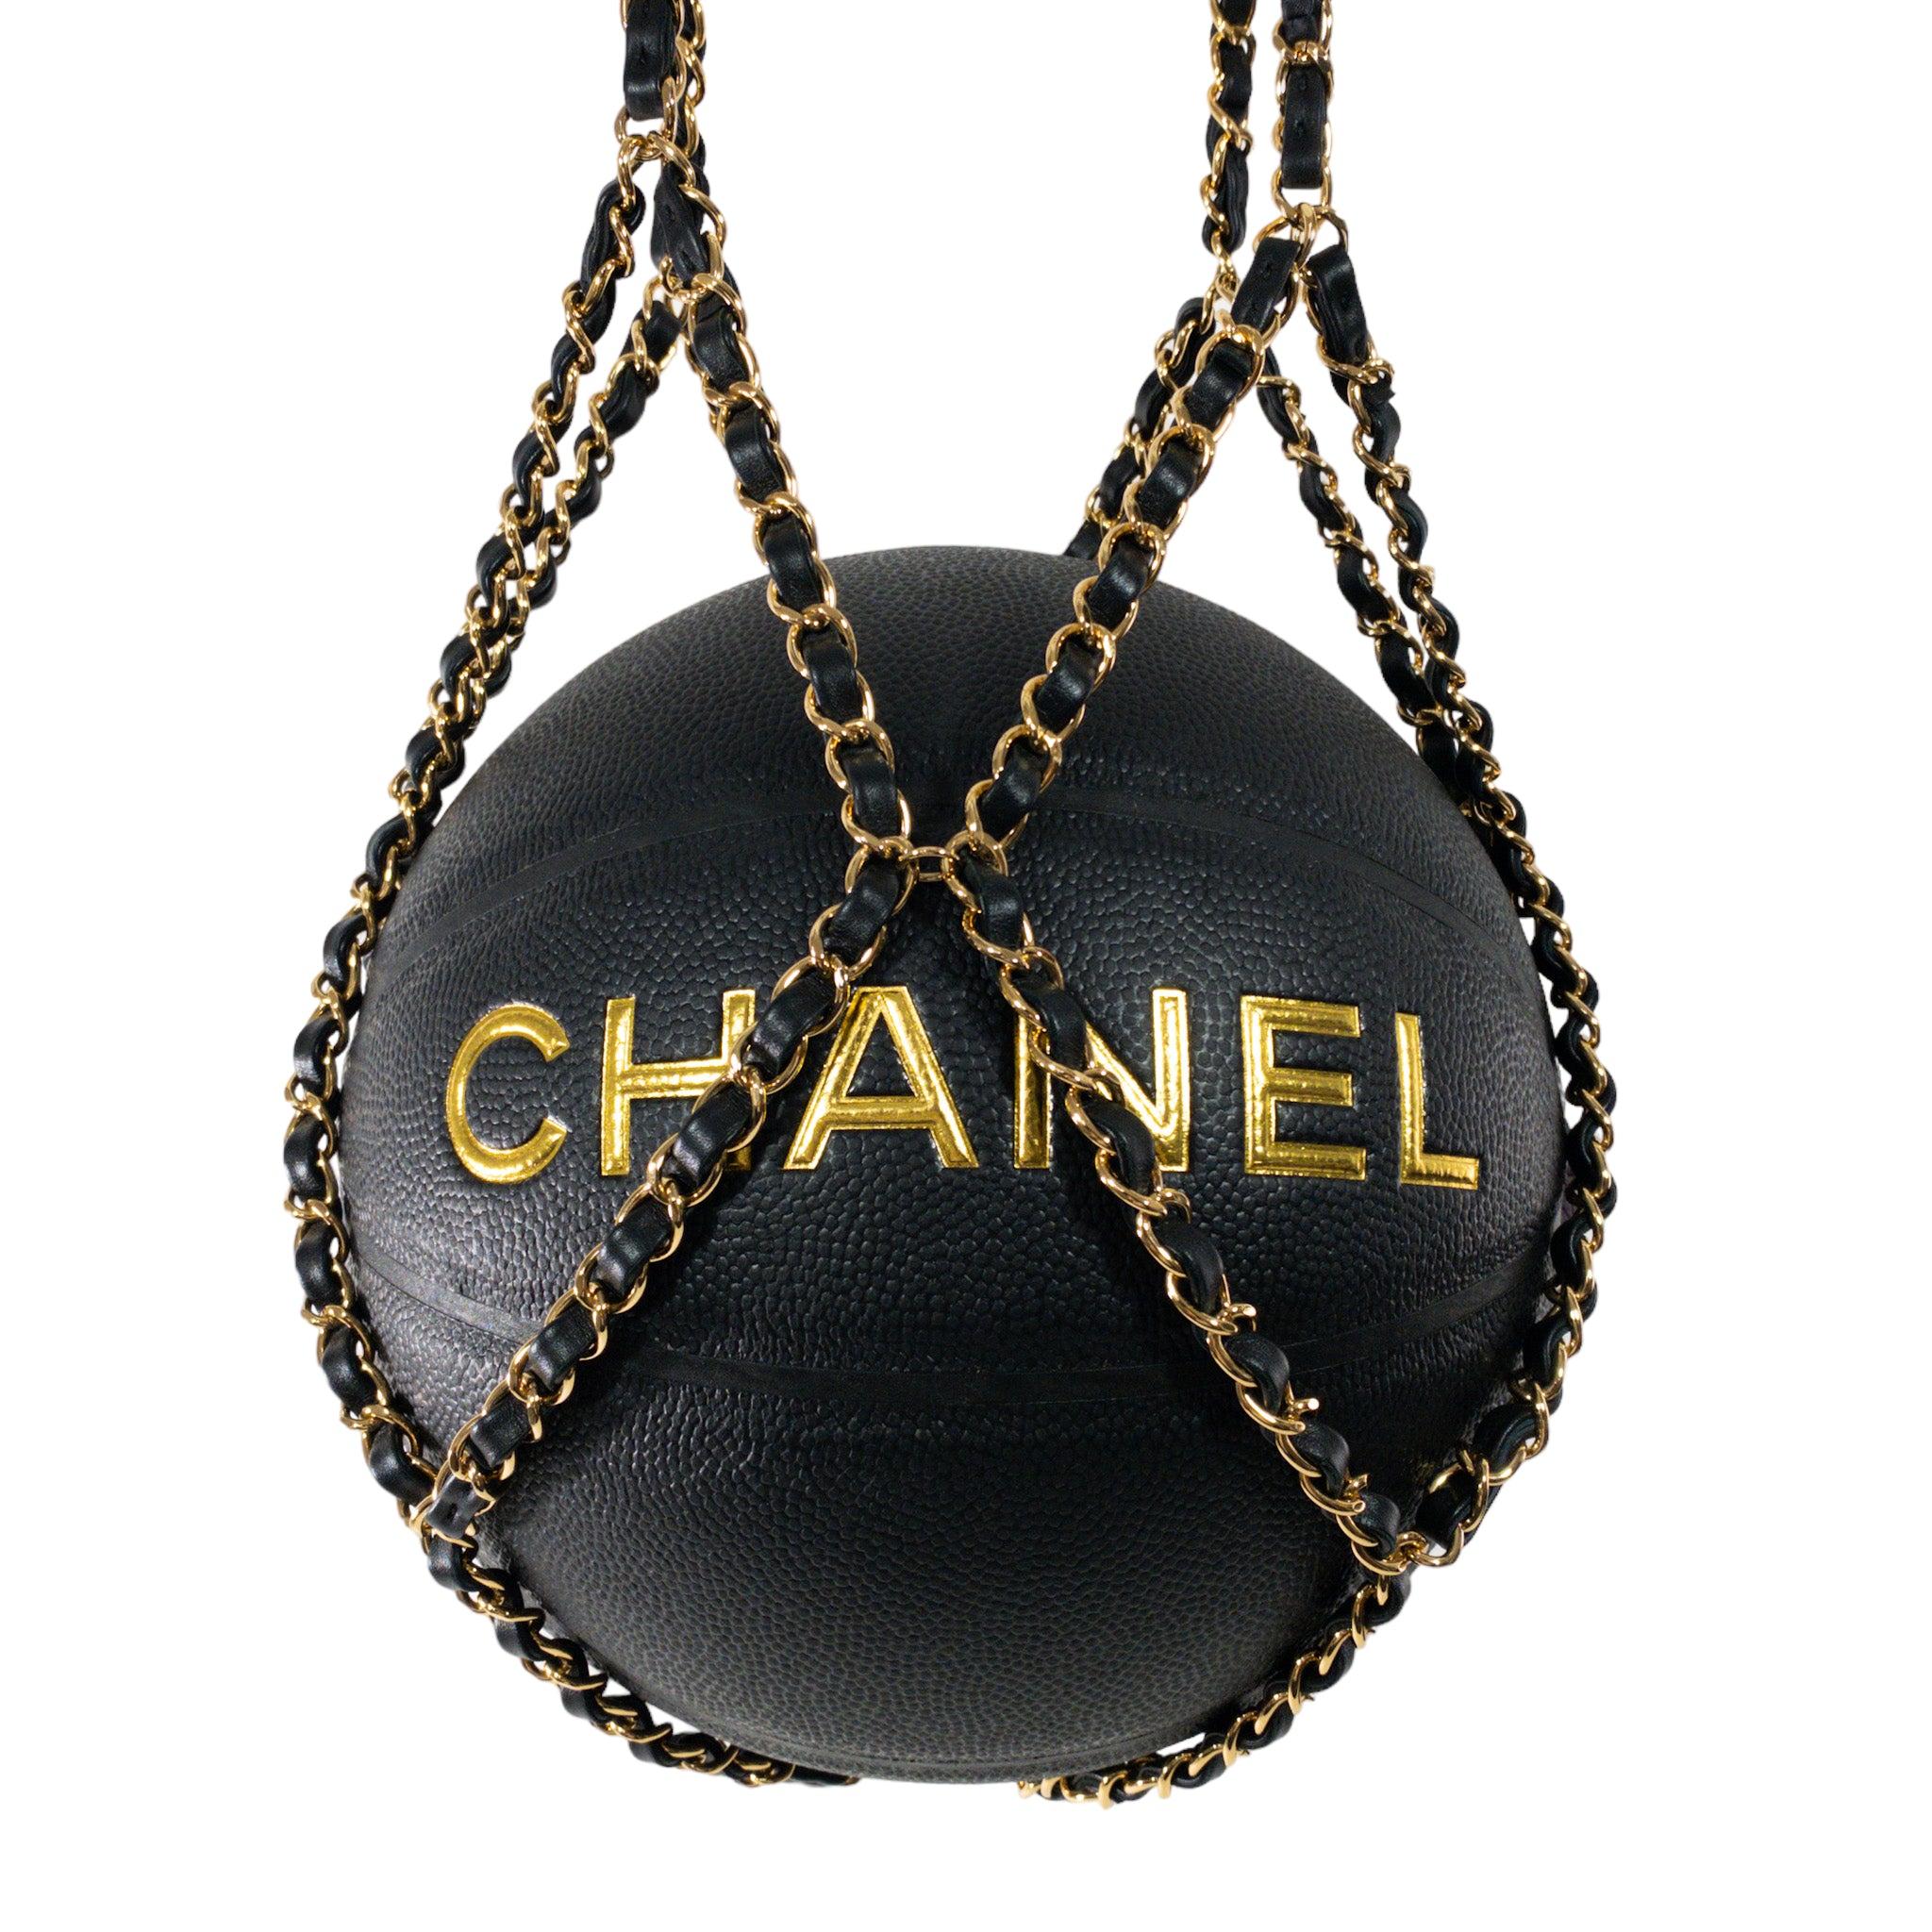 Chanel Limited Edition Basketball with Chain Harness, 2019

This is an authentic Collector's edition Chanel Basketball with woven chain harness. Leather handles on chain straps. Black Exterior with 'CHANEL' and 'CC' in gold paint.

Additional